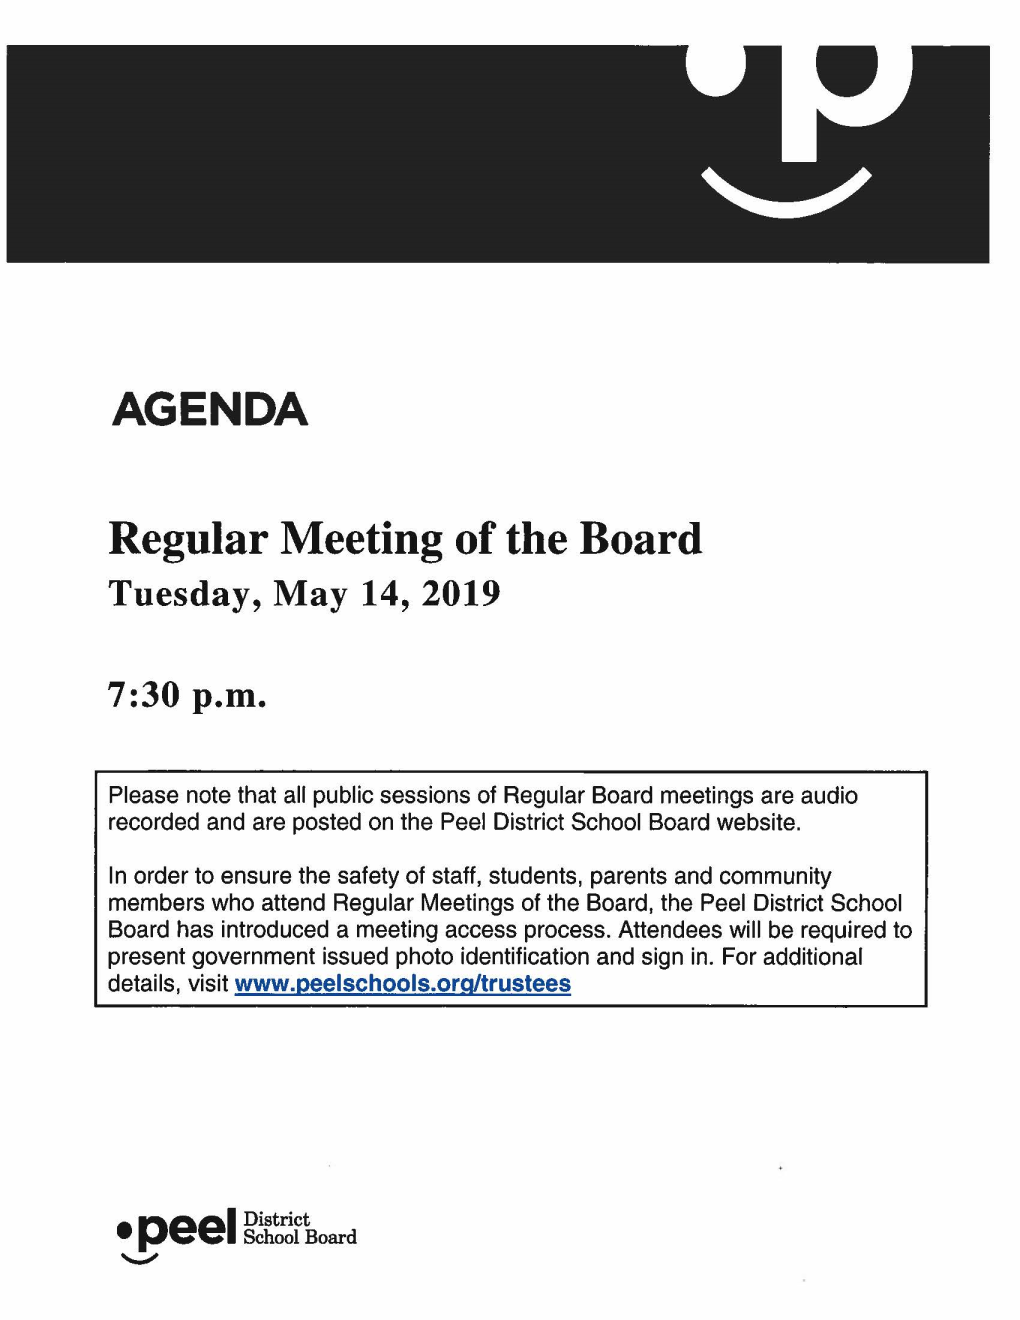 Regular Meeting of the Board Tuesday, May 14, 2019